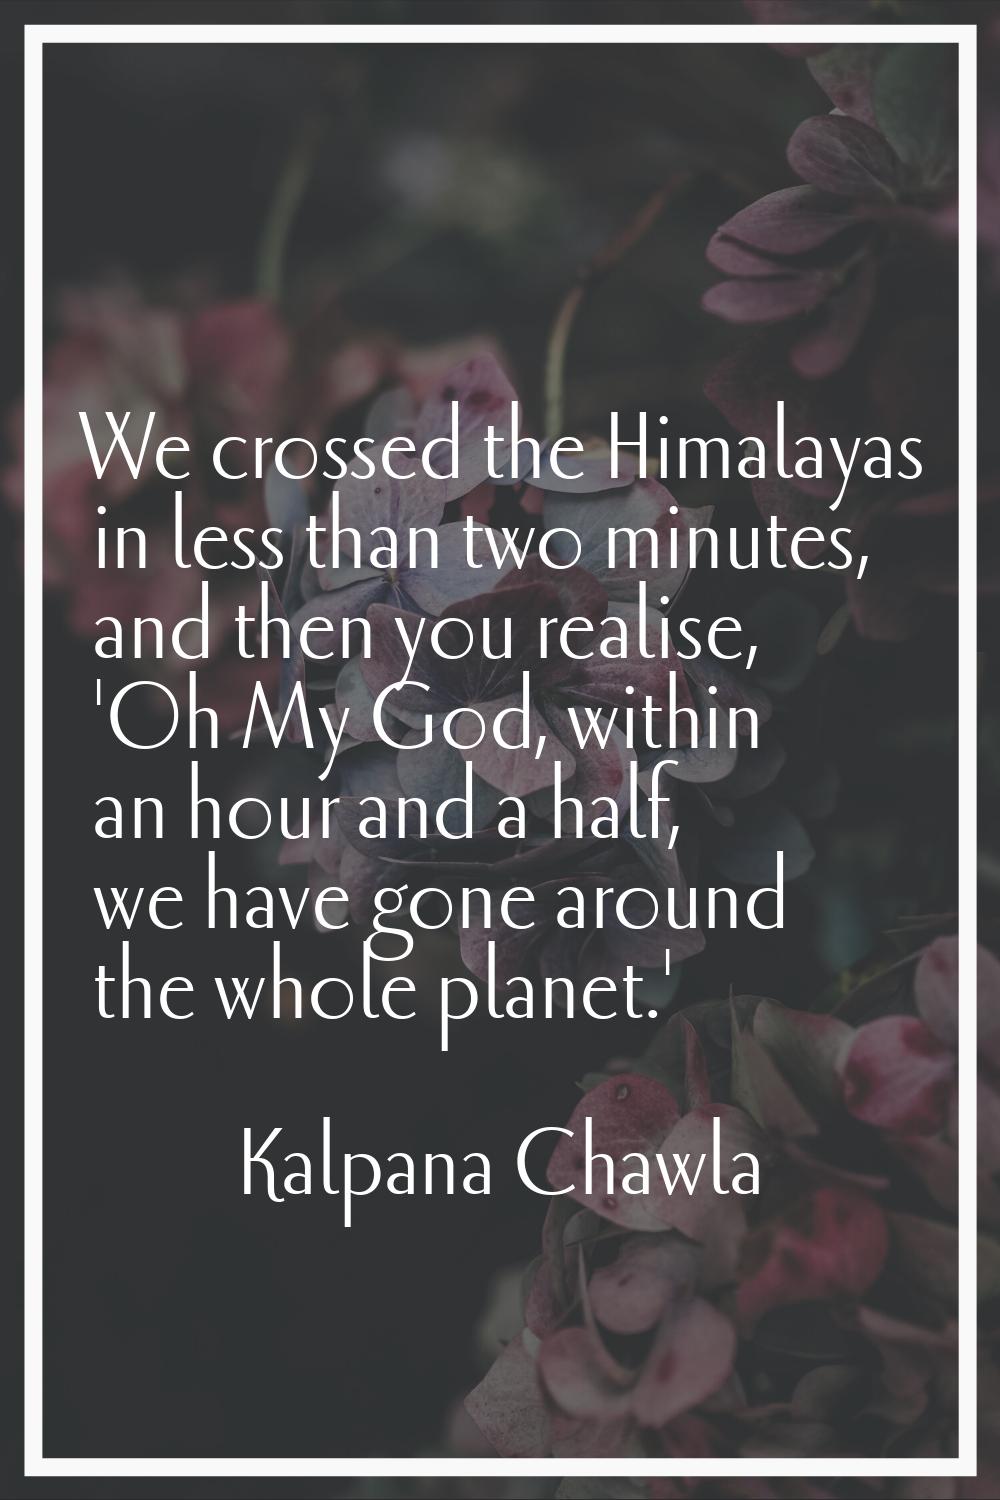 We crossed the Himalayas in less than two minutes, and then you realise, 'Oh My God, within an hour